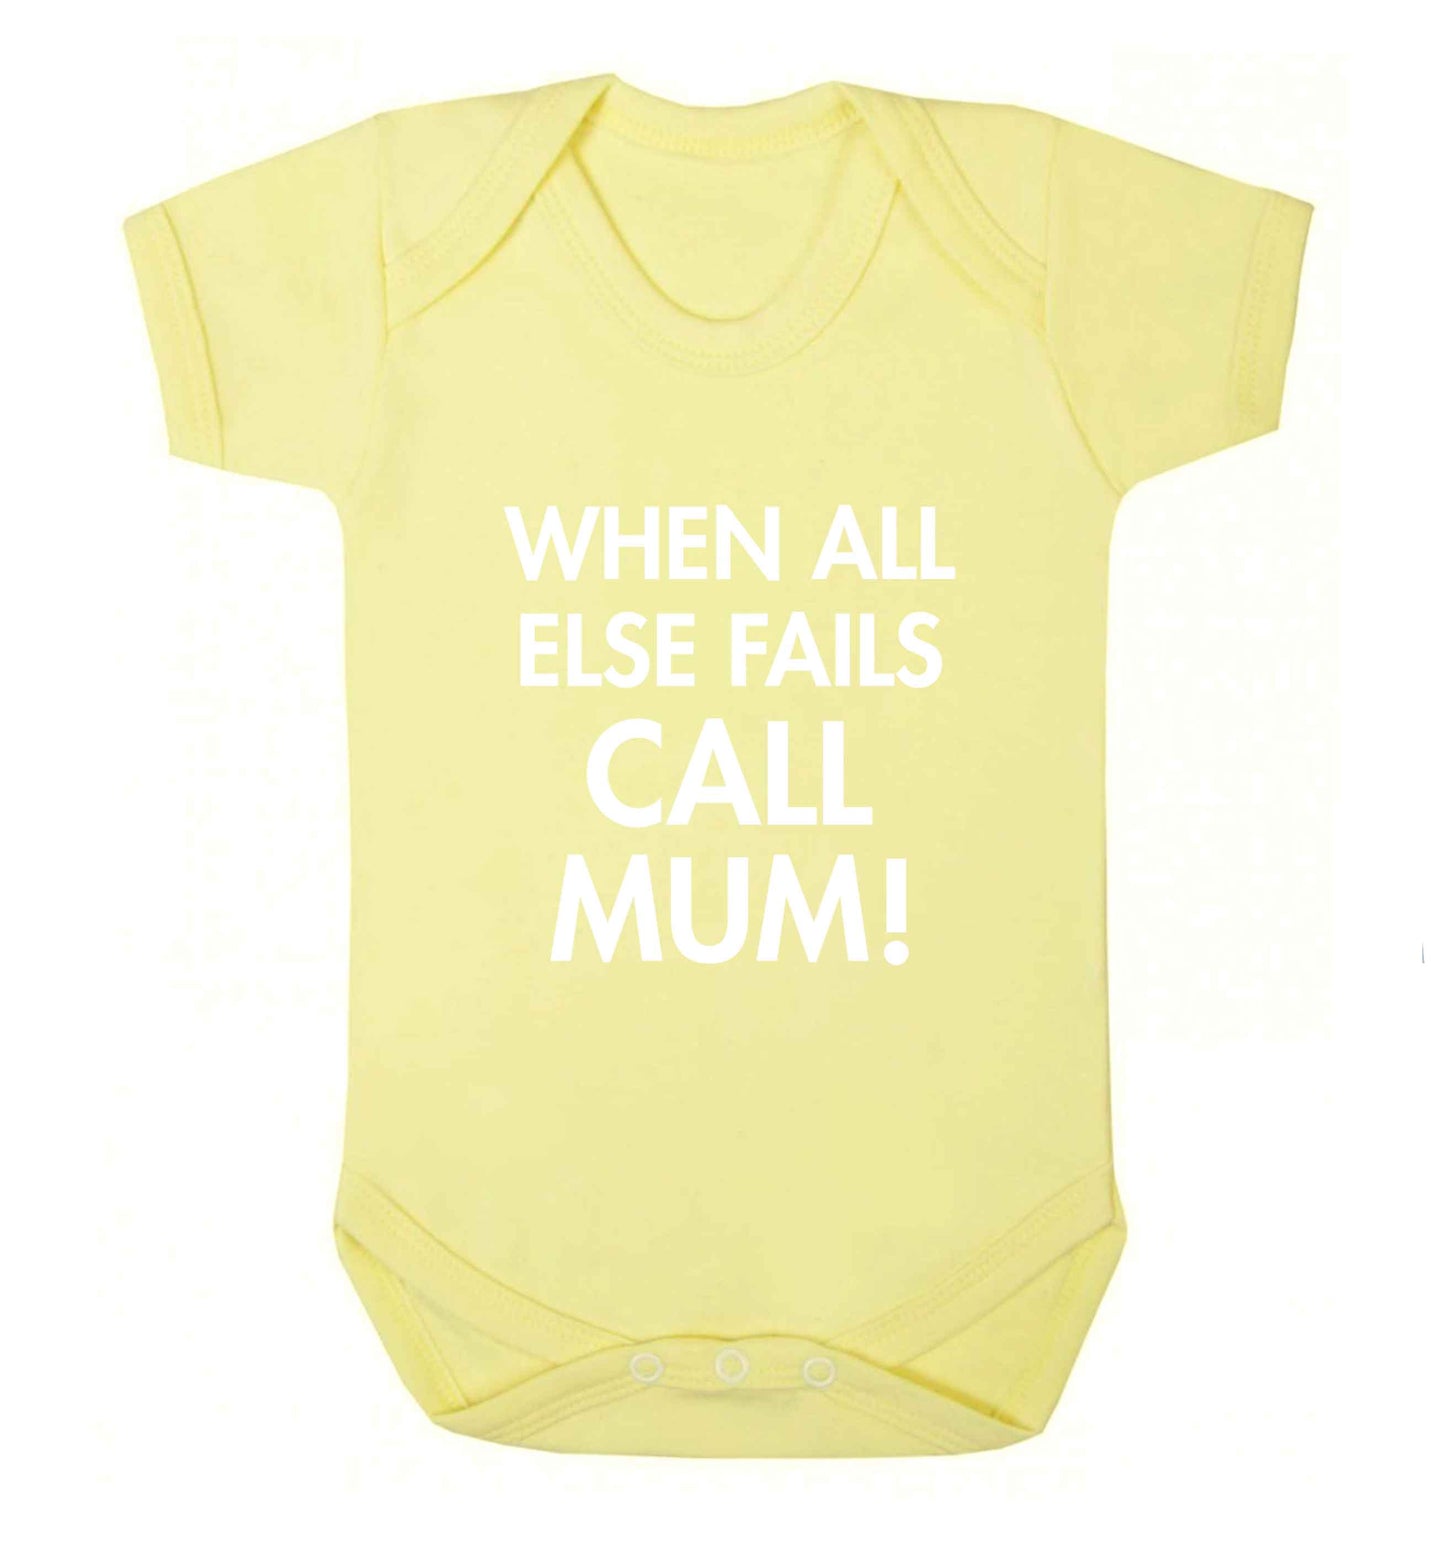 When all else fails call mum! baby vest pale yellow 18-24 months